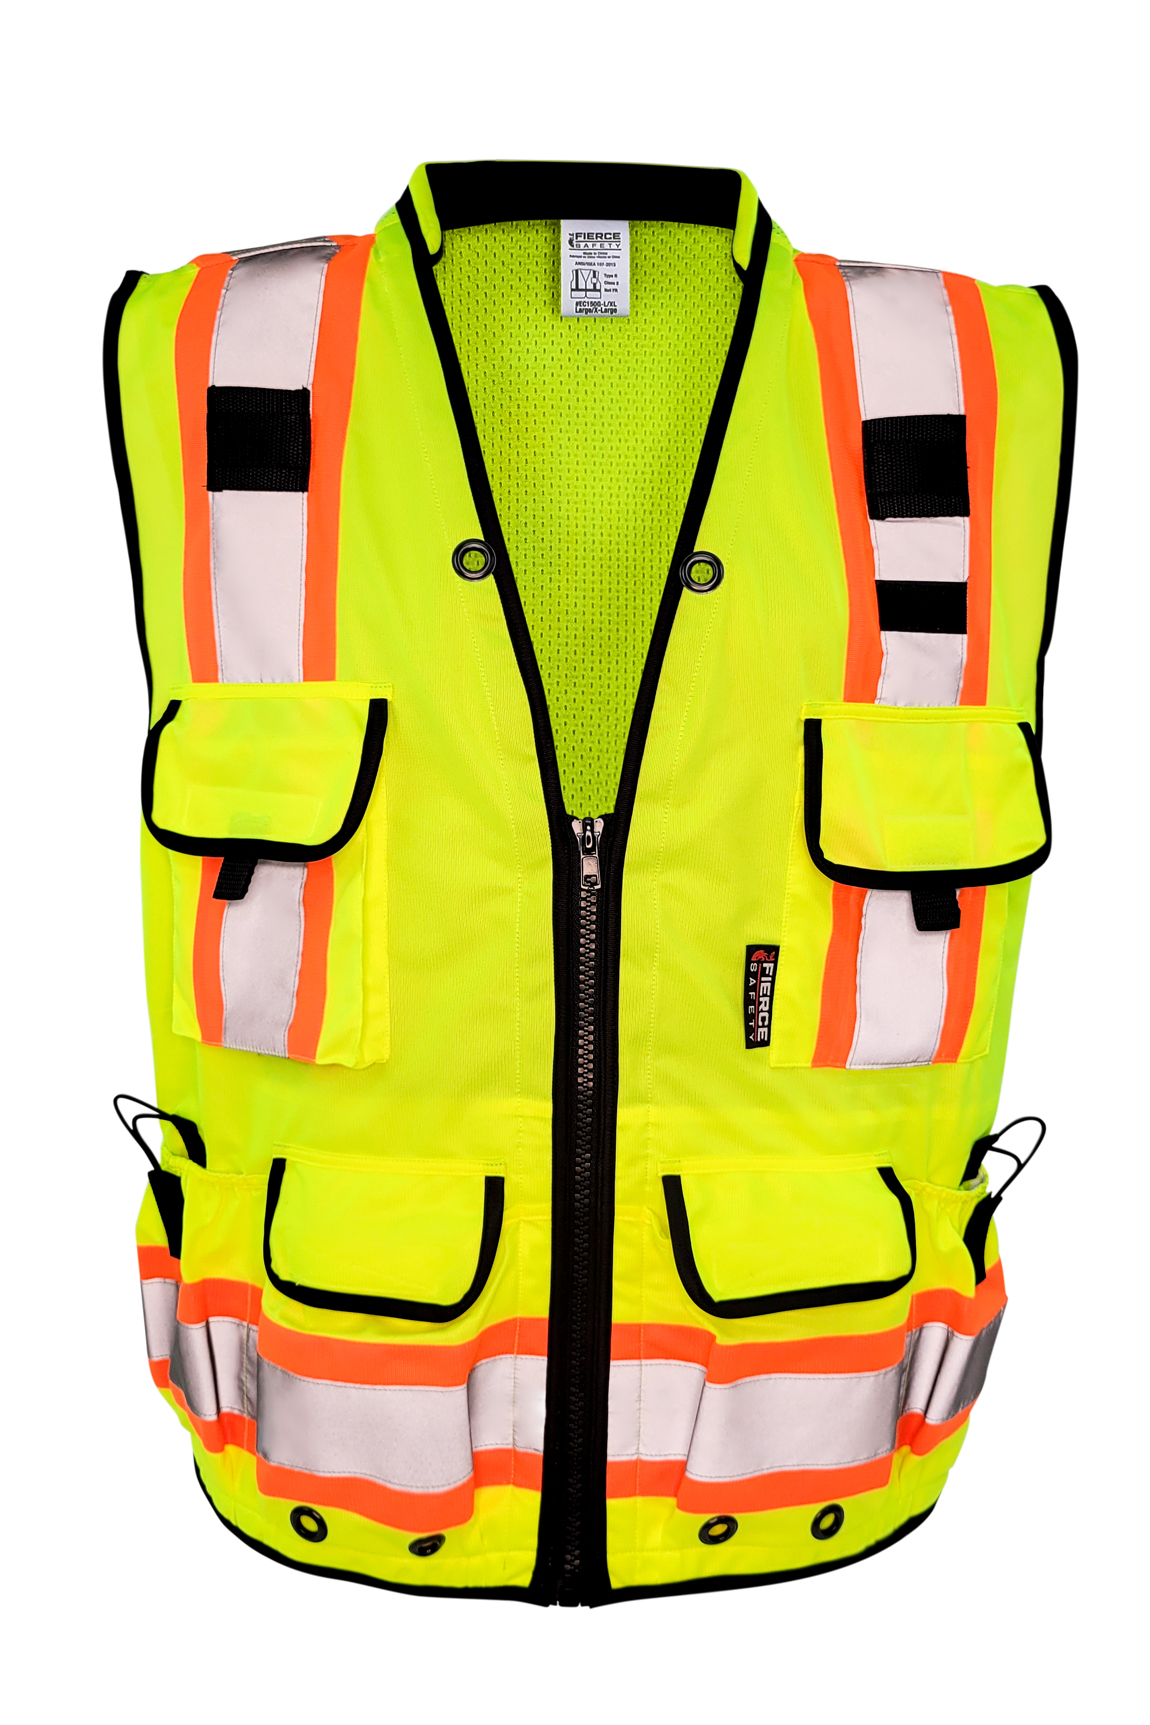 Buy Würth Velcro fabric safety vest 110 GSM  Yellow Online in Dubai  Sharjah Abu Dhabi United Arab Emirates  Würth AE  Buy Fasteners Power  Tools Chemicals Construction Accessories PPE Equipments from Wurth Gulf